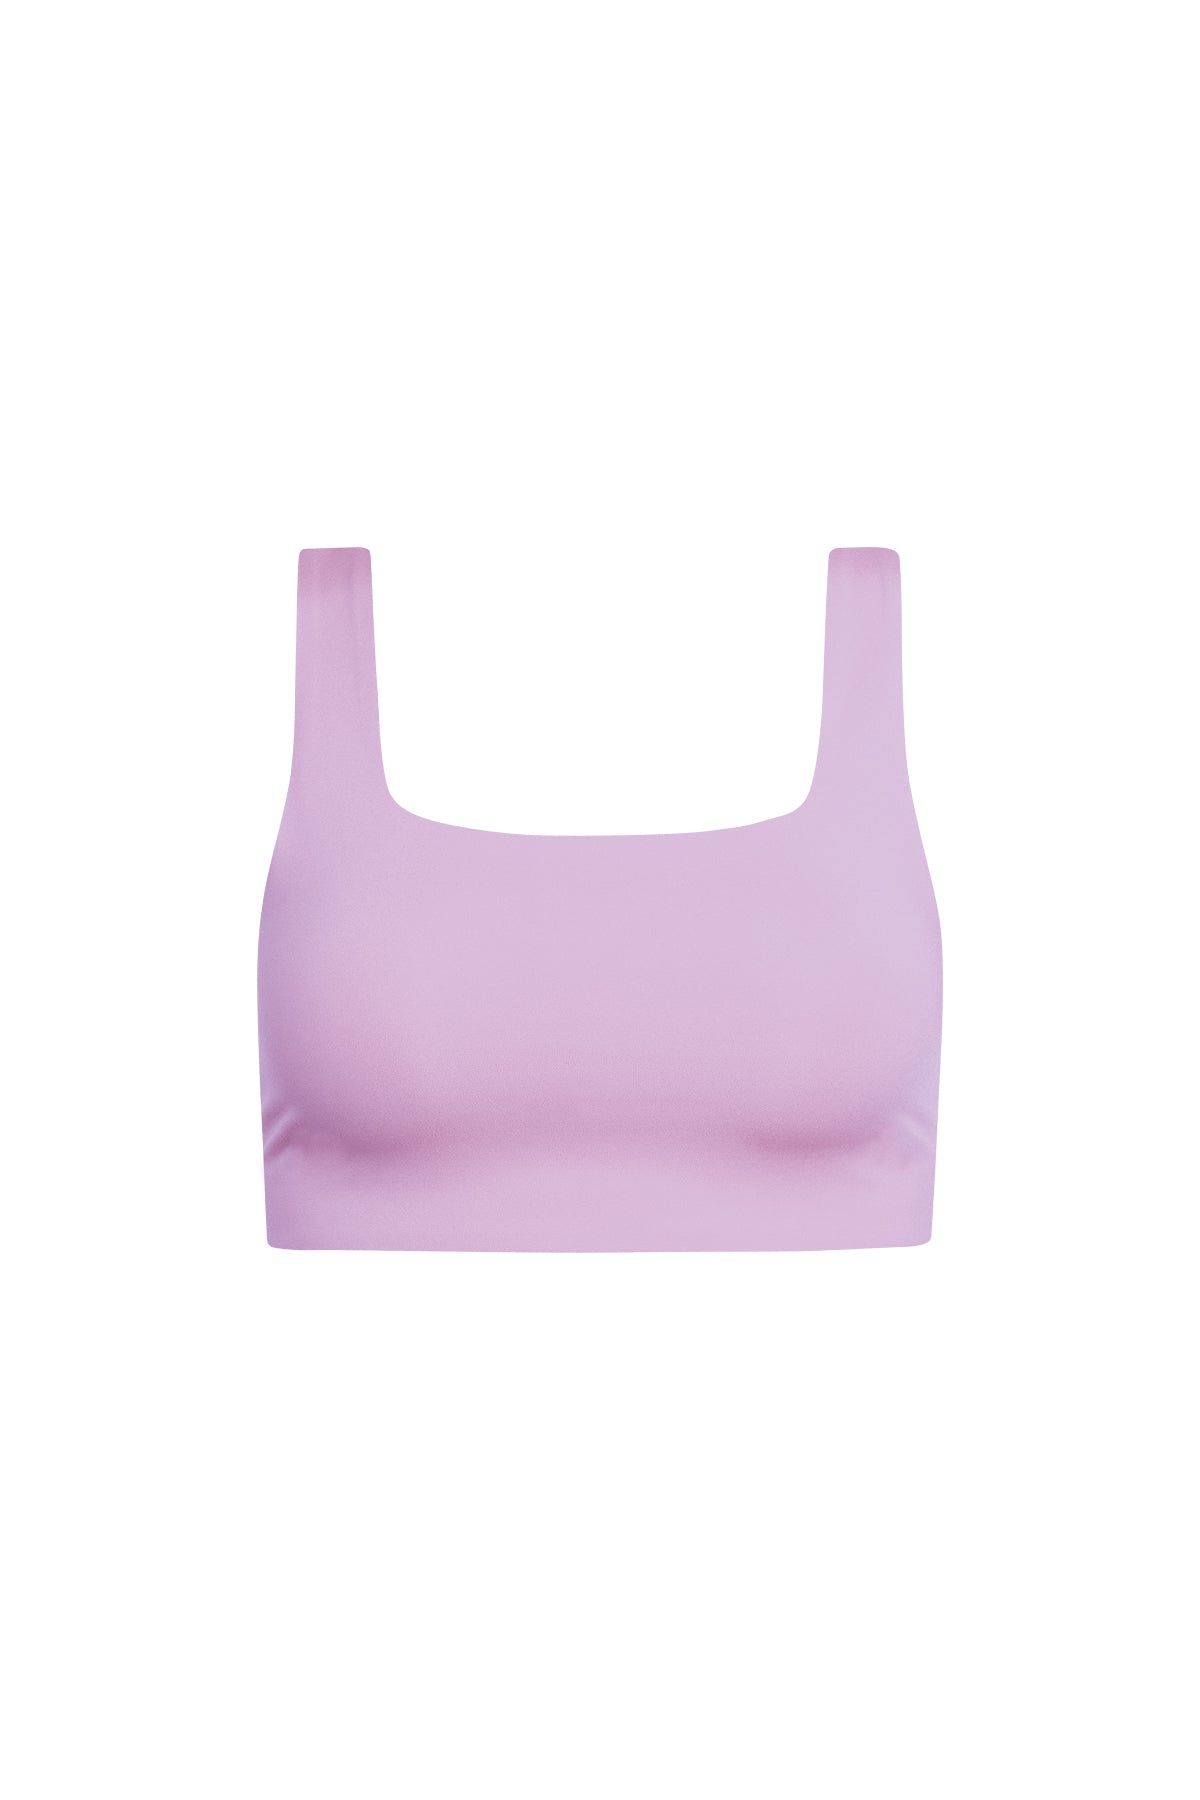 Girlfriend Collective Tommy Bra in Lilac